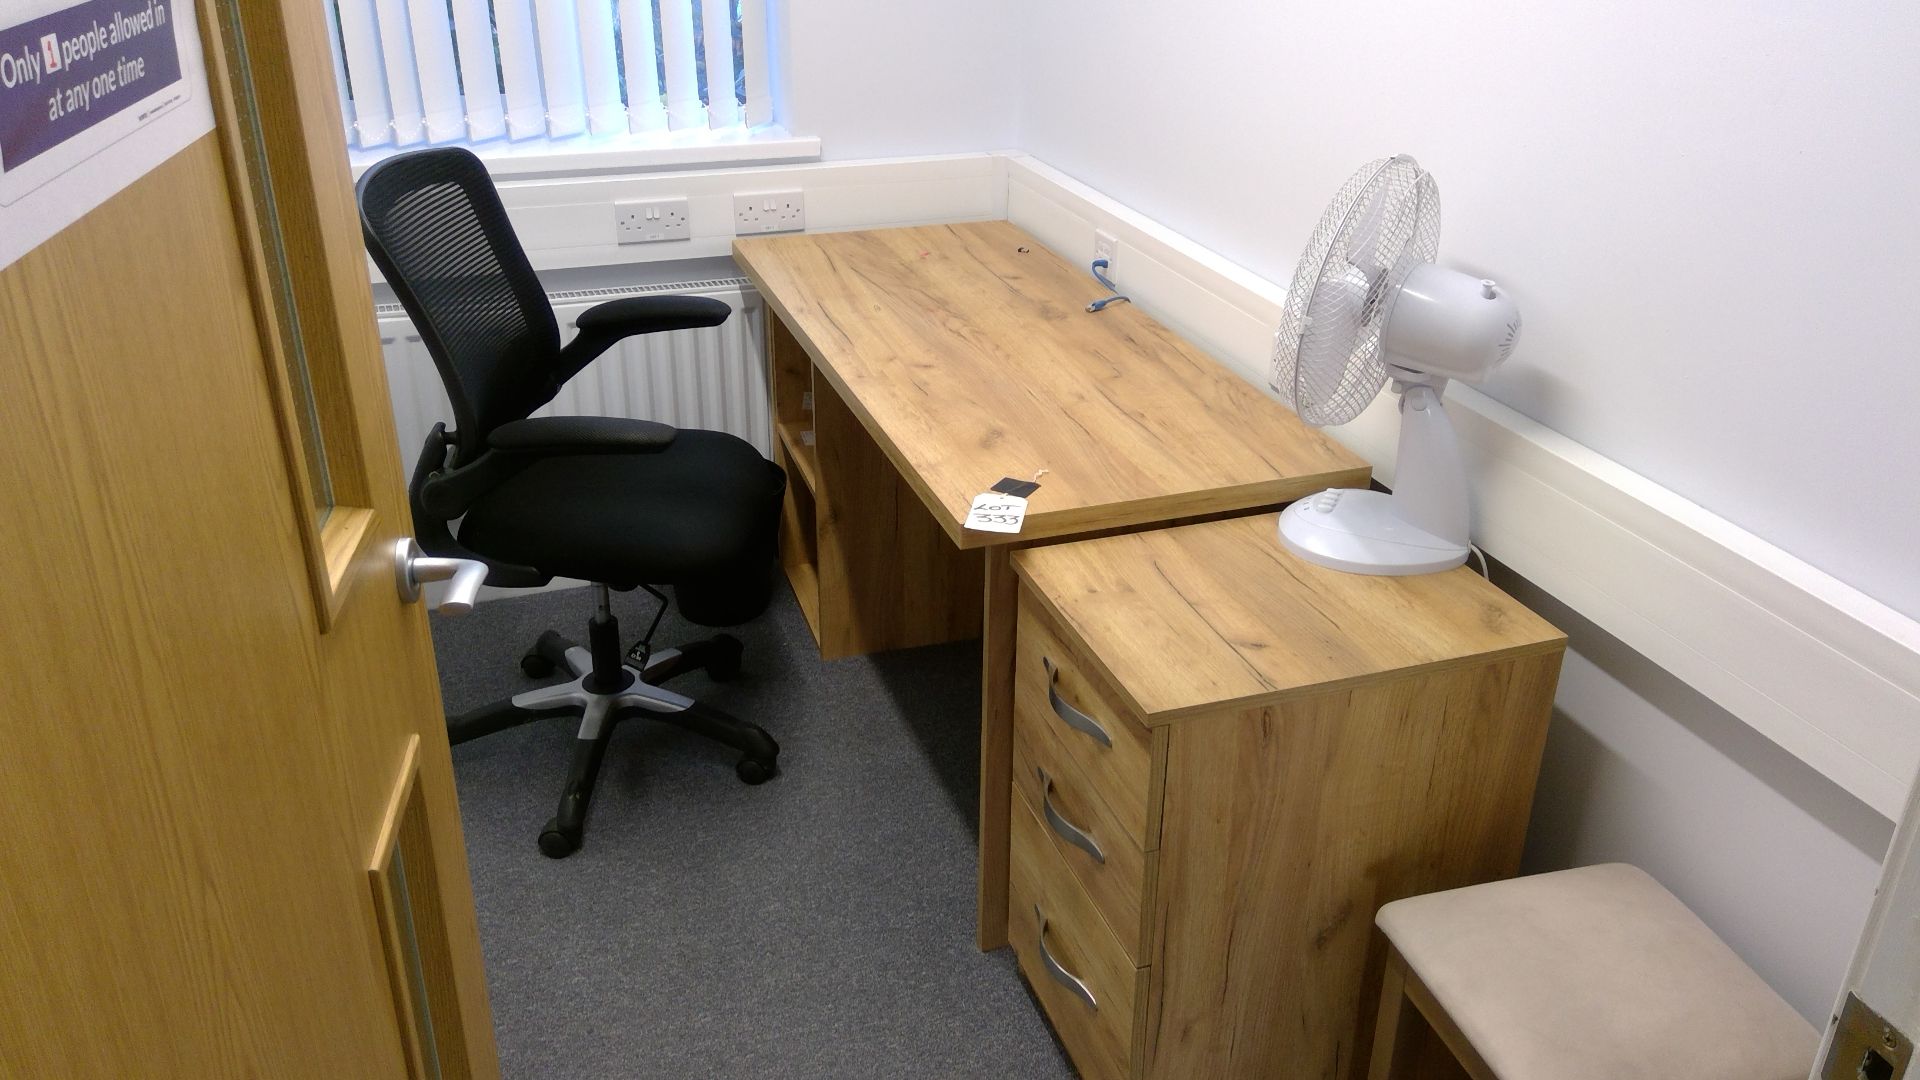 Contents of office 2 to include oak effect desk, pedestal, chair and bookcase